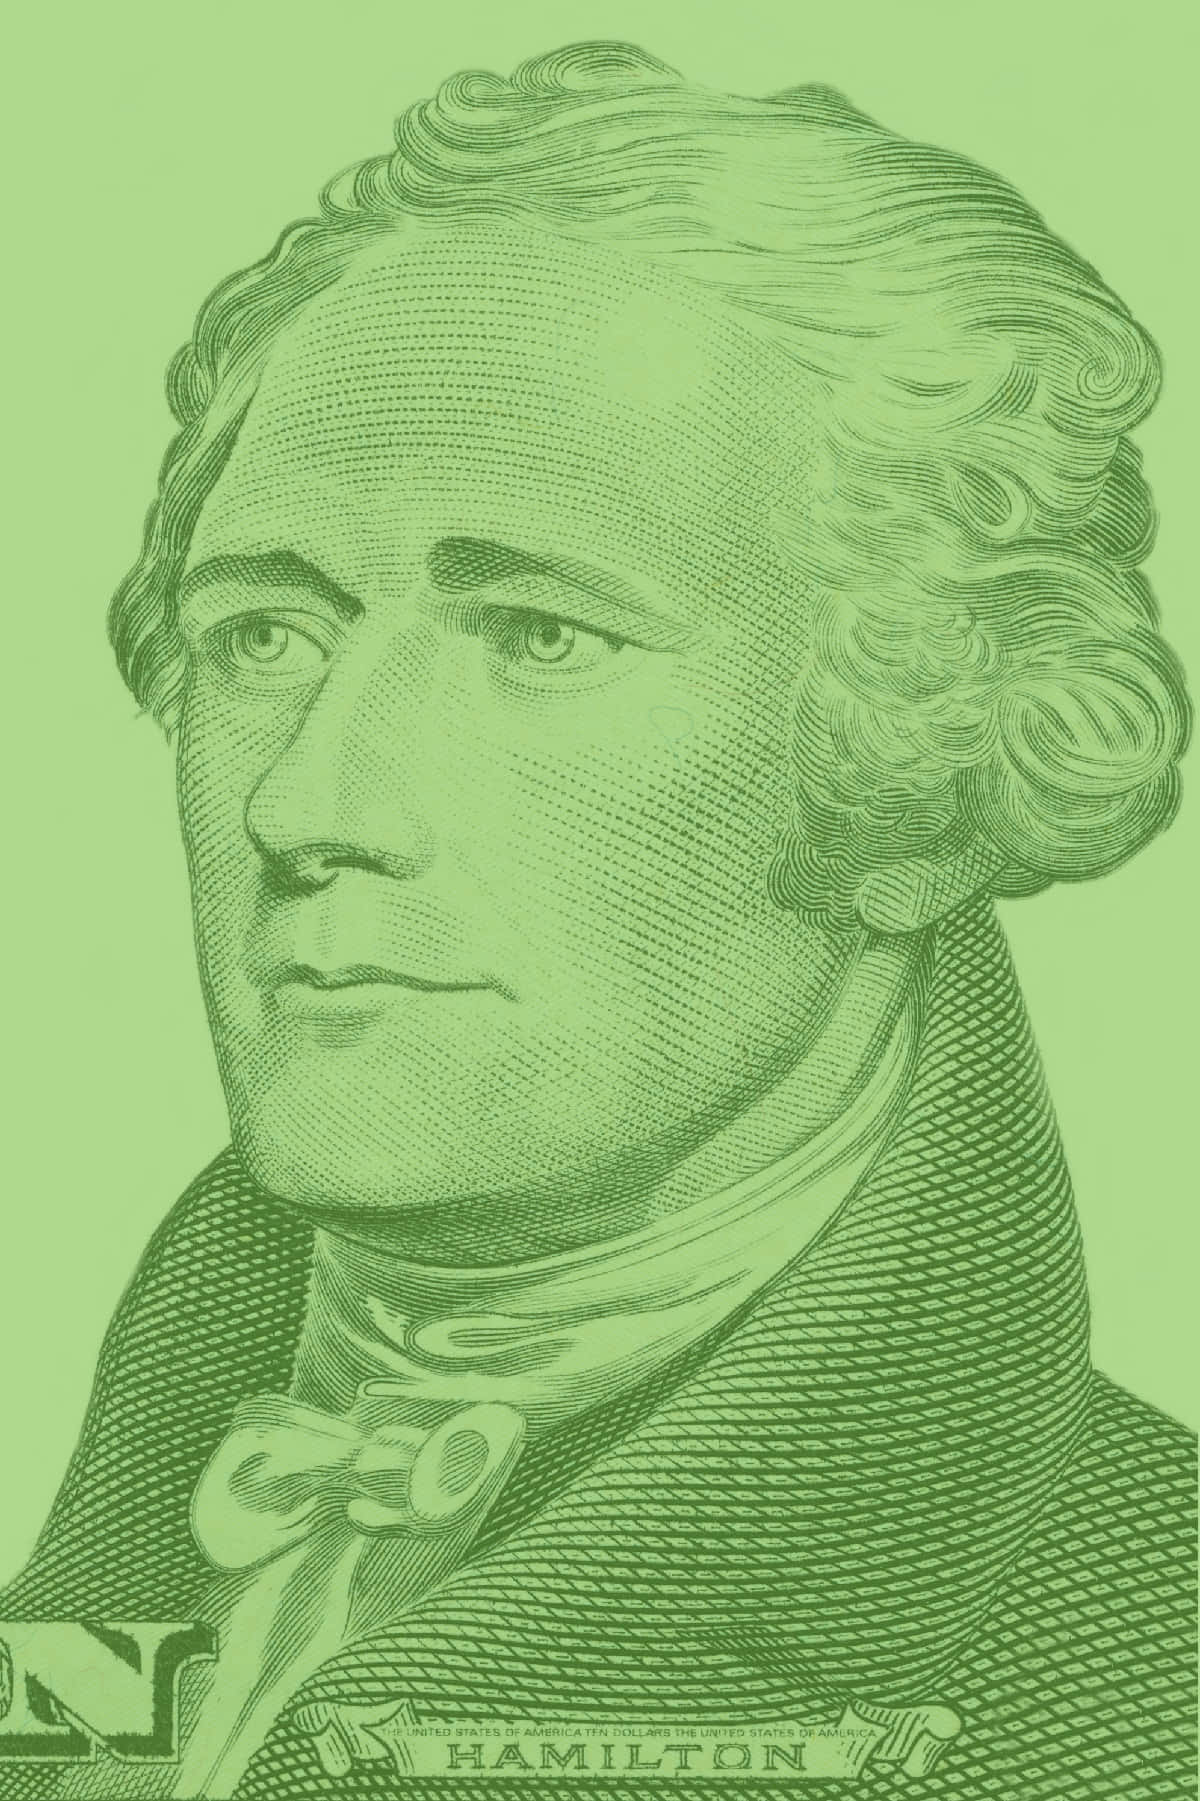 Alexander Hamilton, Revolutionary War hero and Founding Father of the United States